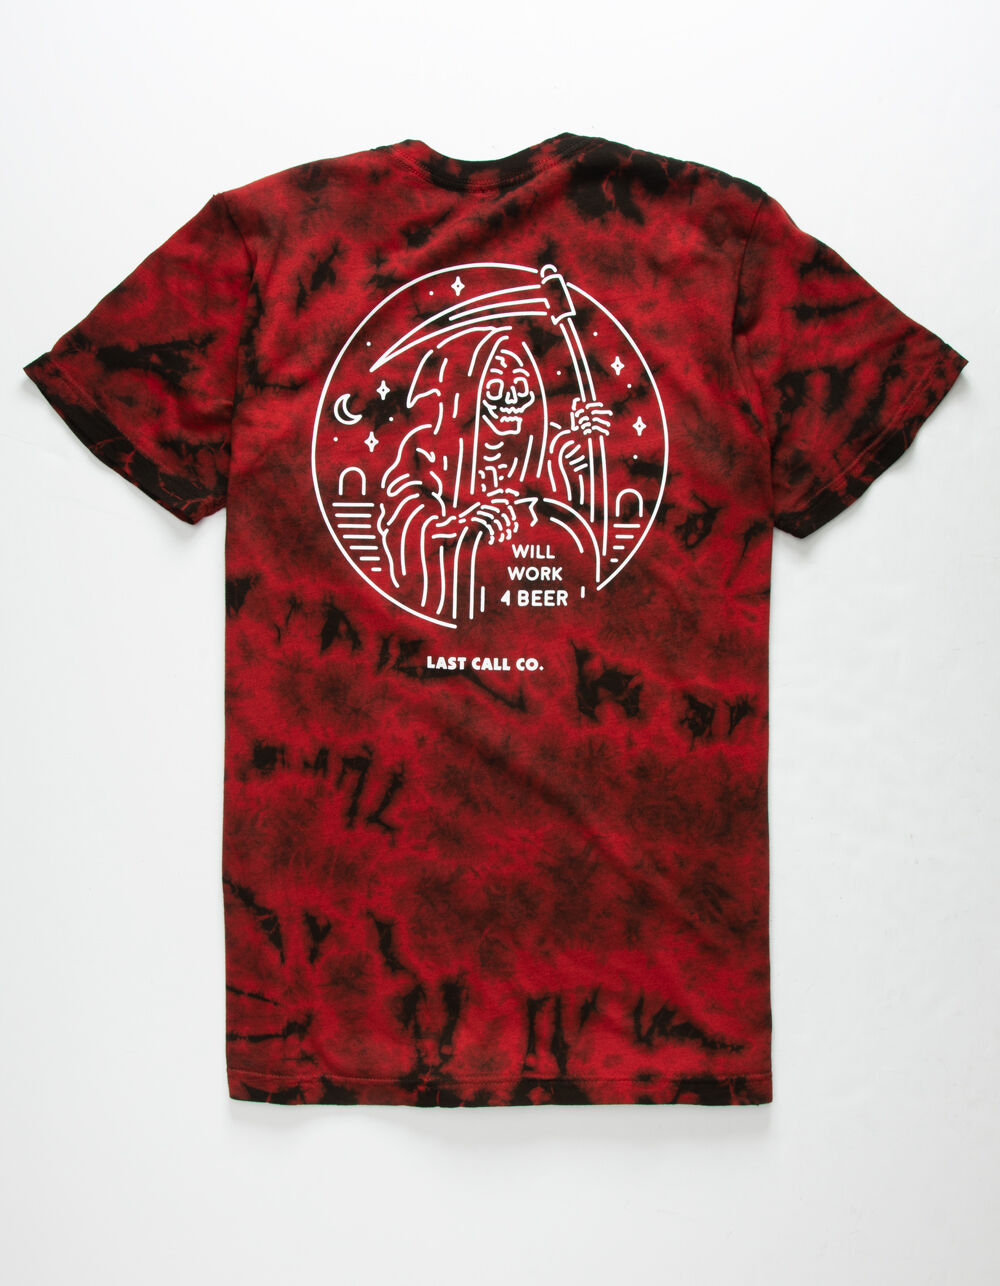 LAST CALL CO. Will Work Mens Tie Dye T-Shirt - RED COMBO | Tillys